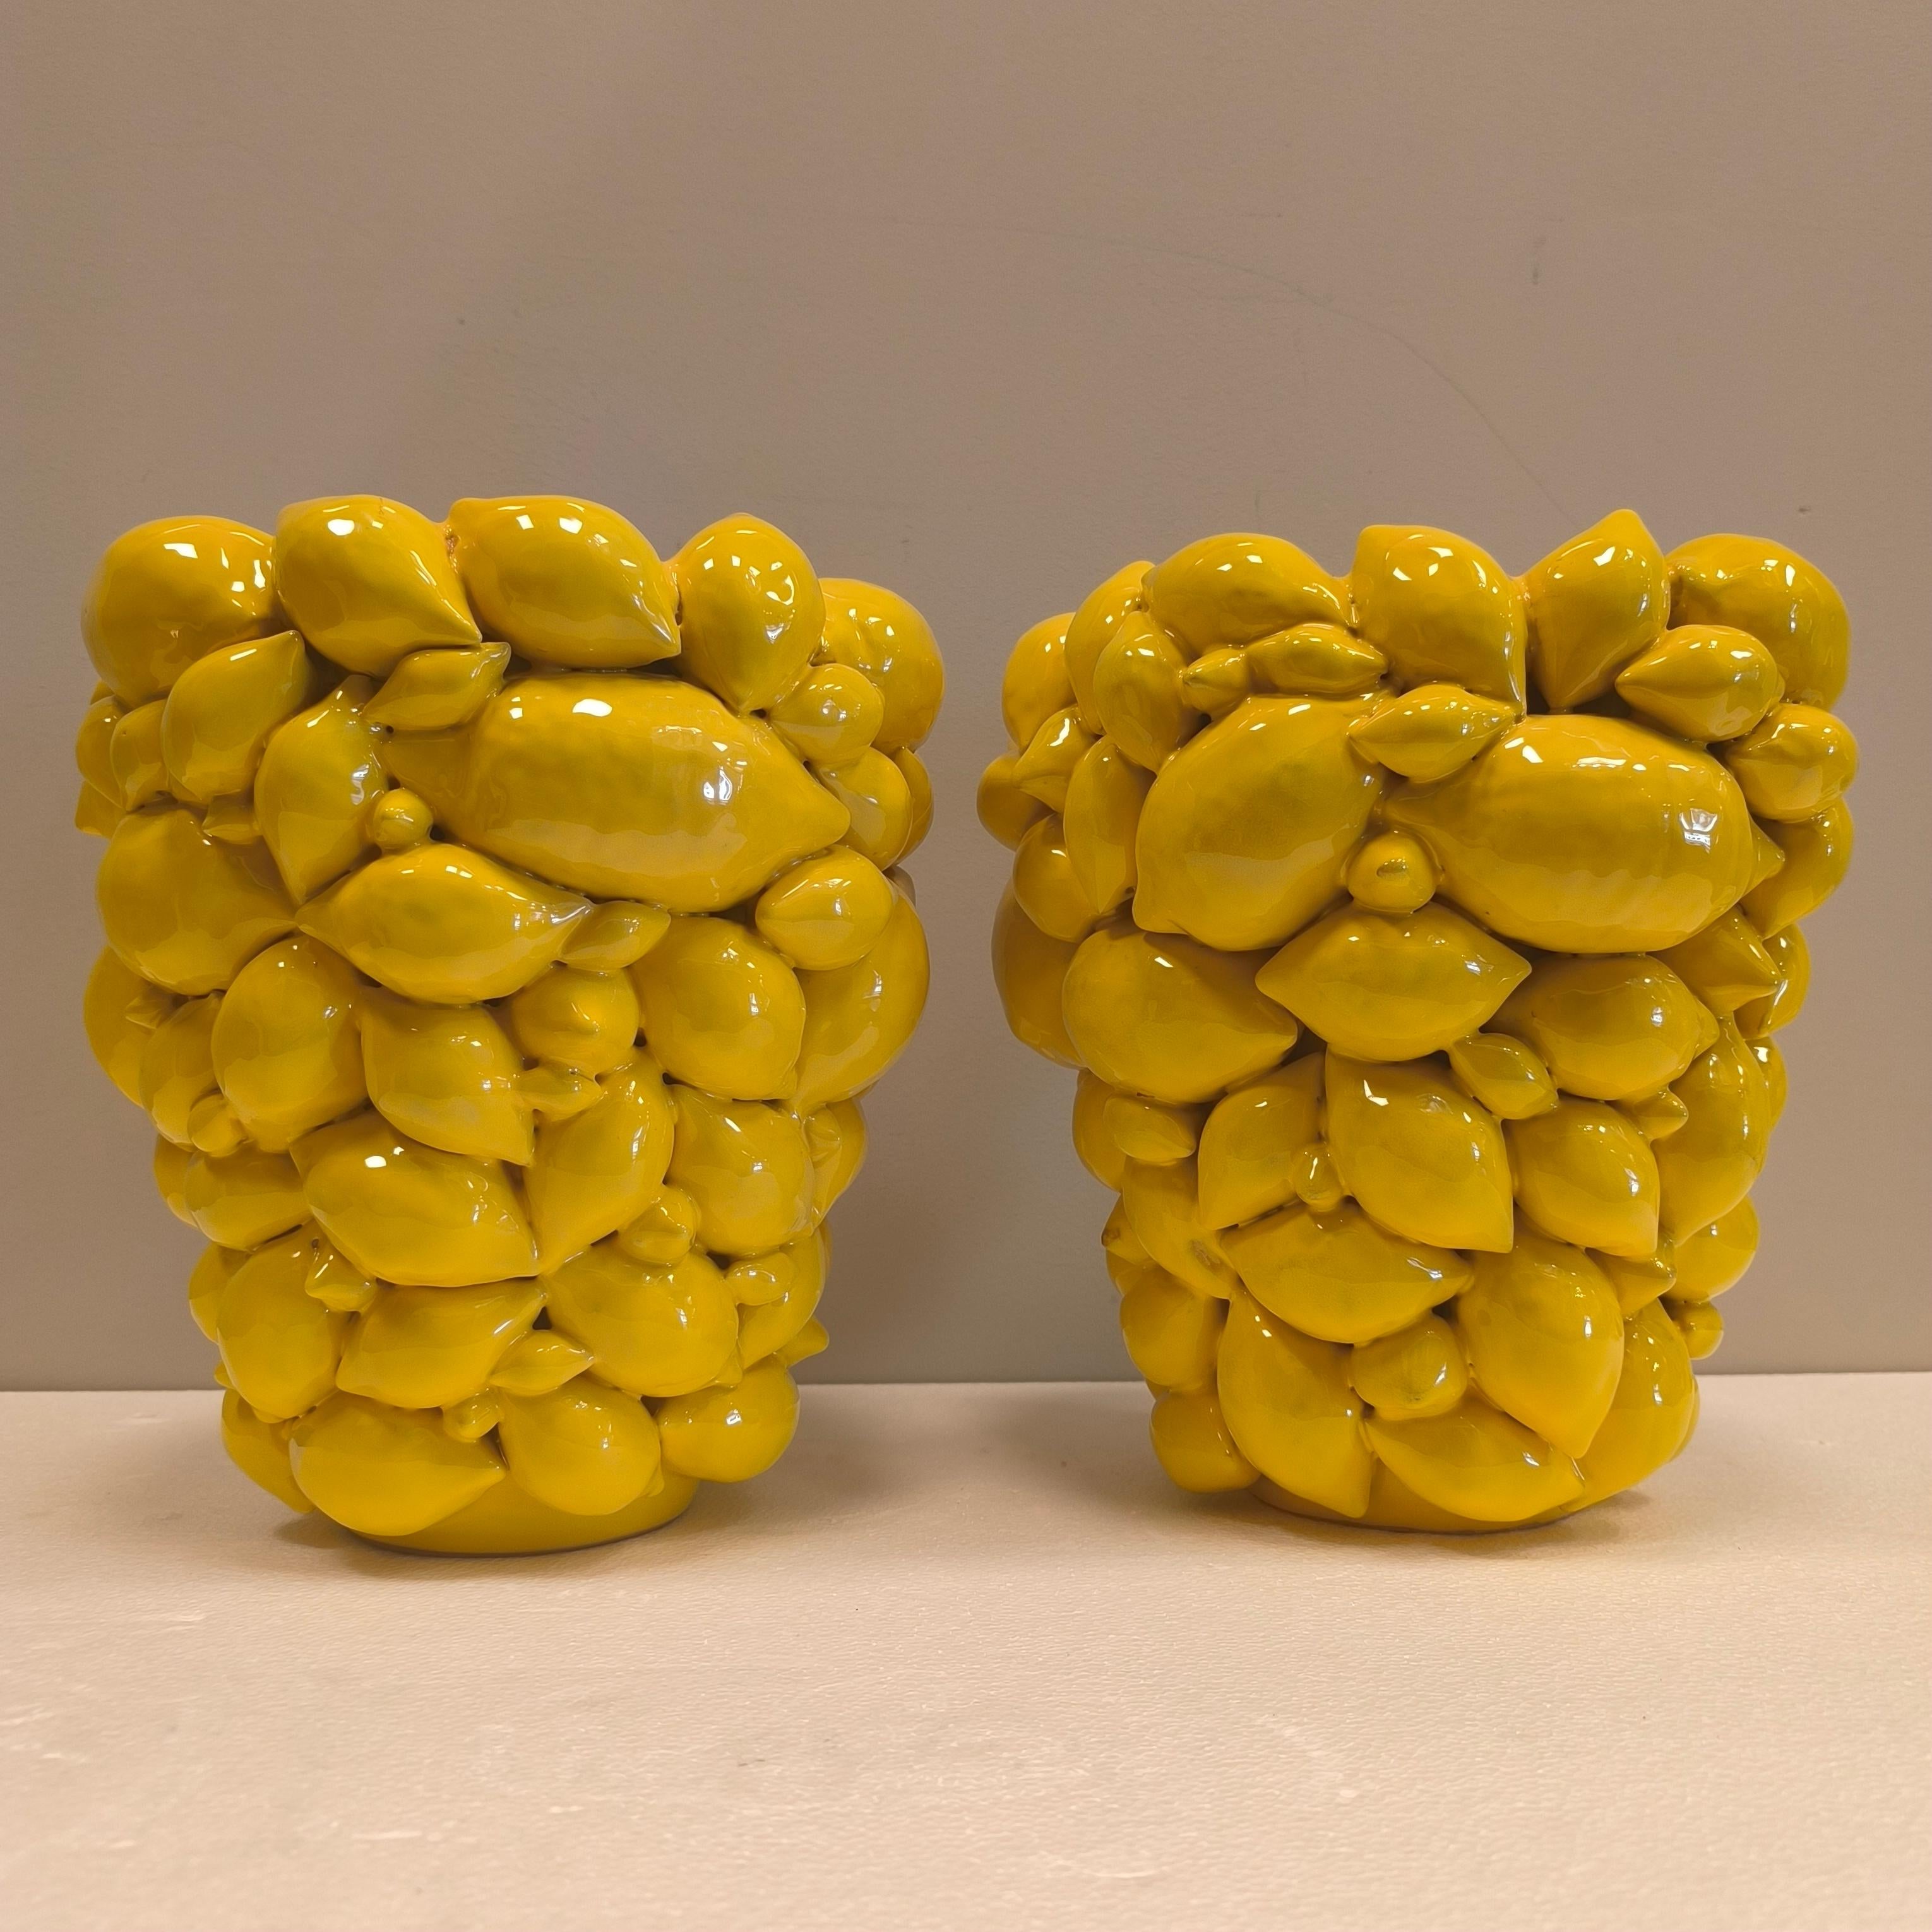 Pair of Italy  lemon vases, Yellow glazed ceramic, R. Acampora, Limited Edition For Sale 1